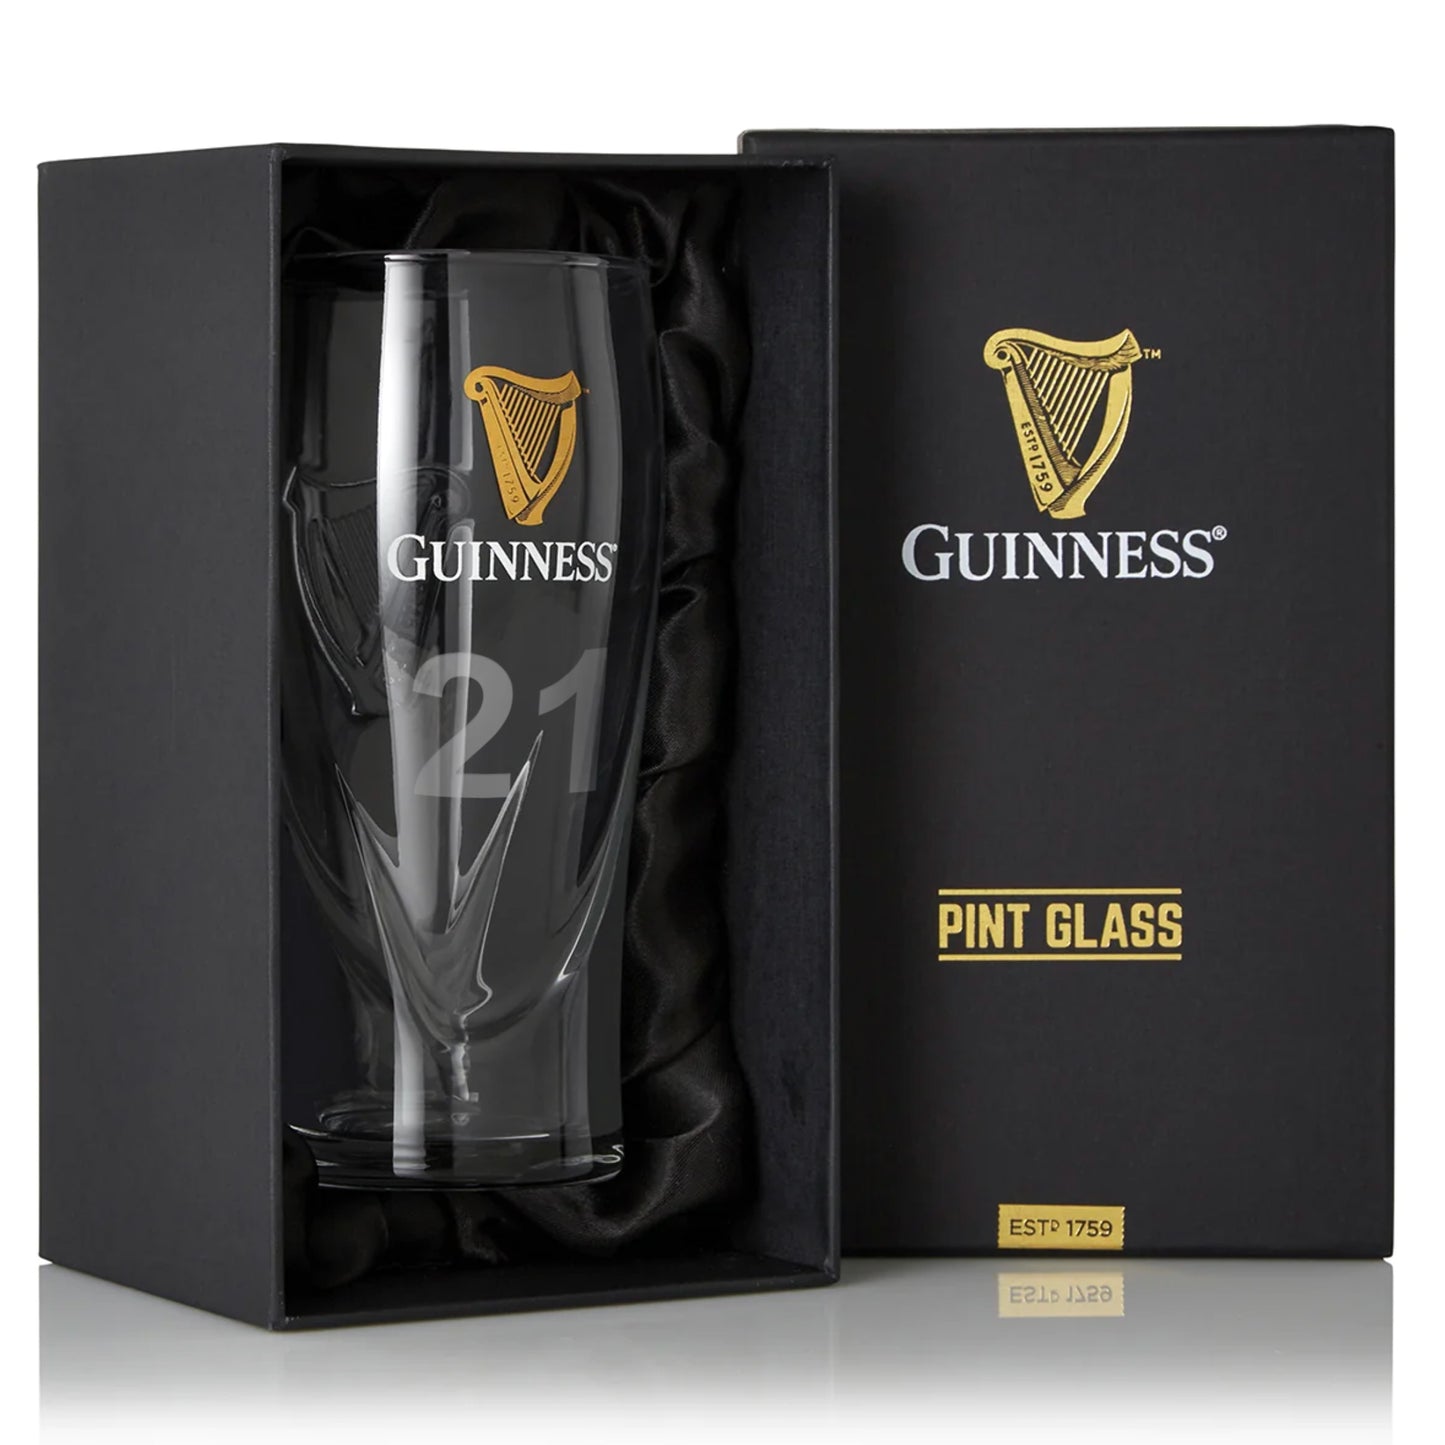 A Guinness Pint Glass with the Harp logo, neatly packaged in a box.